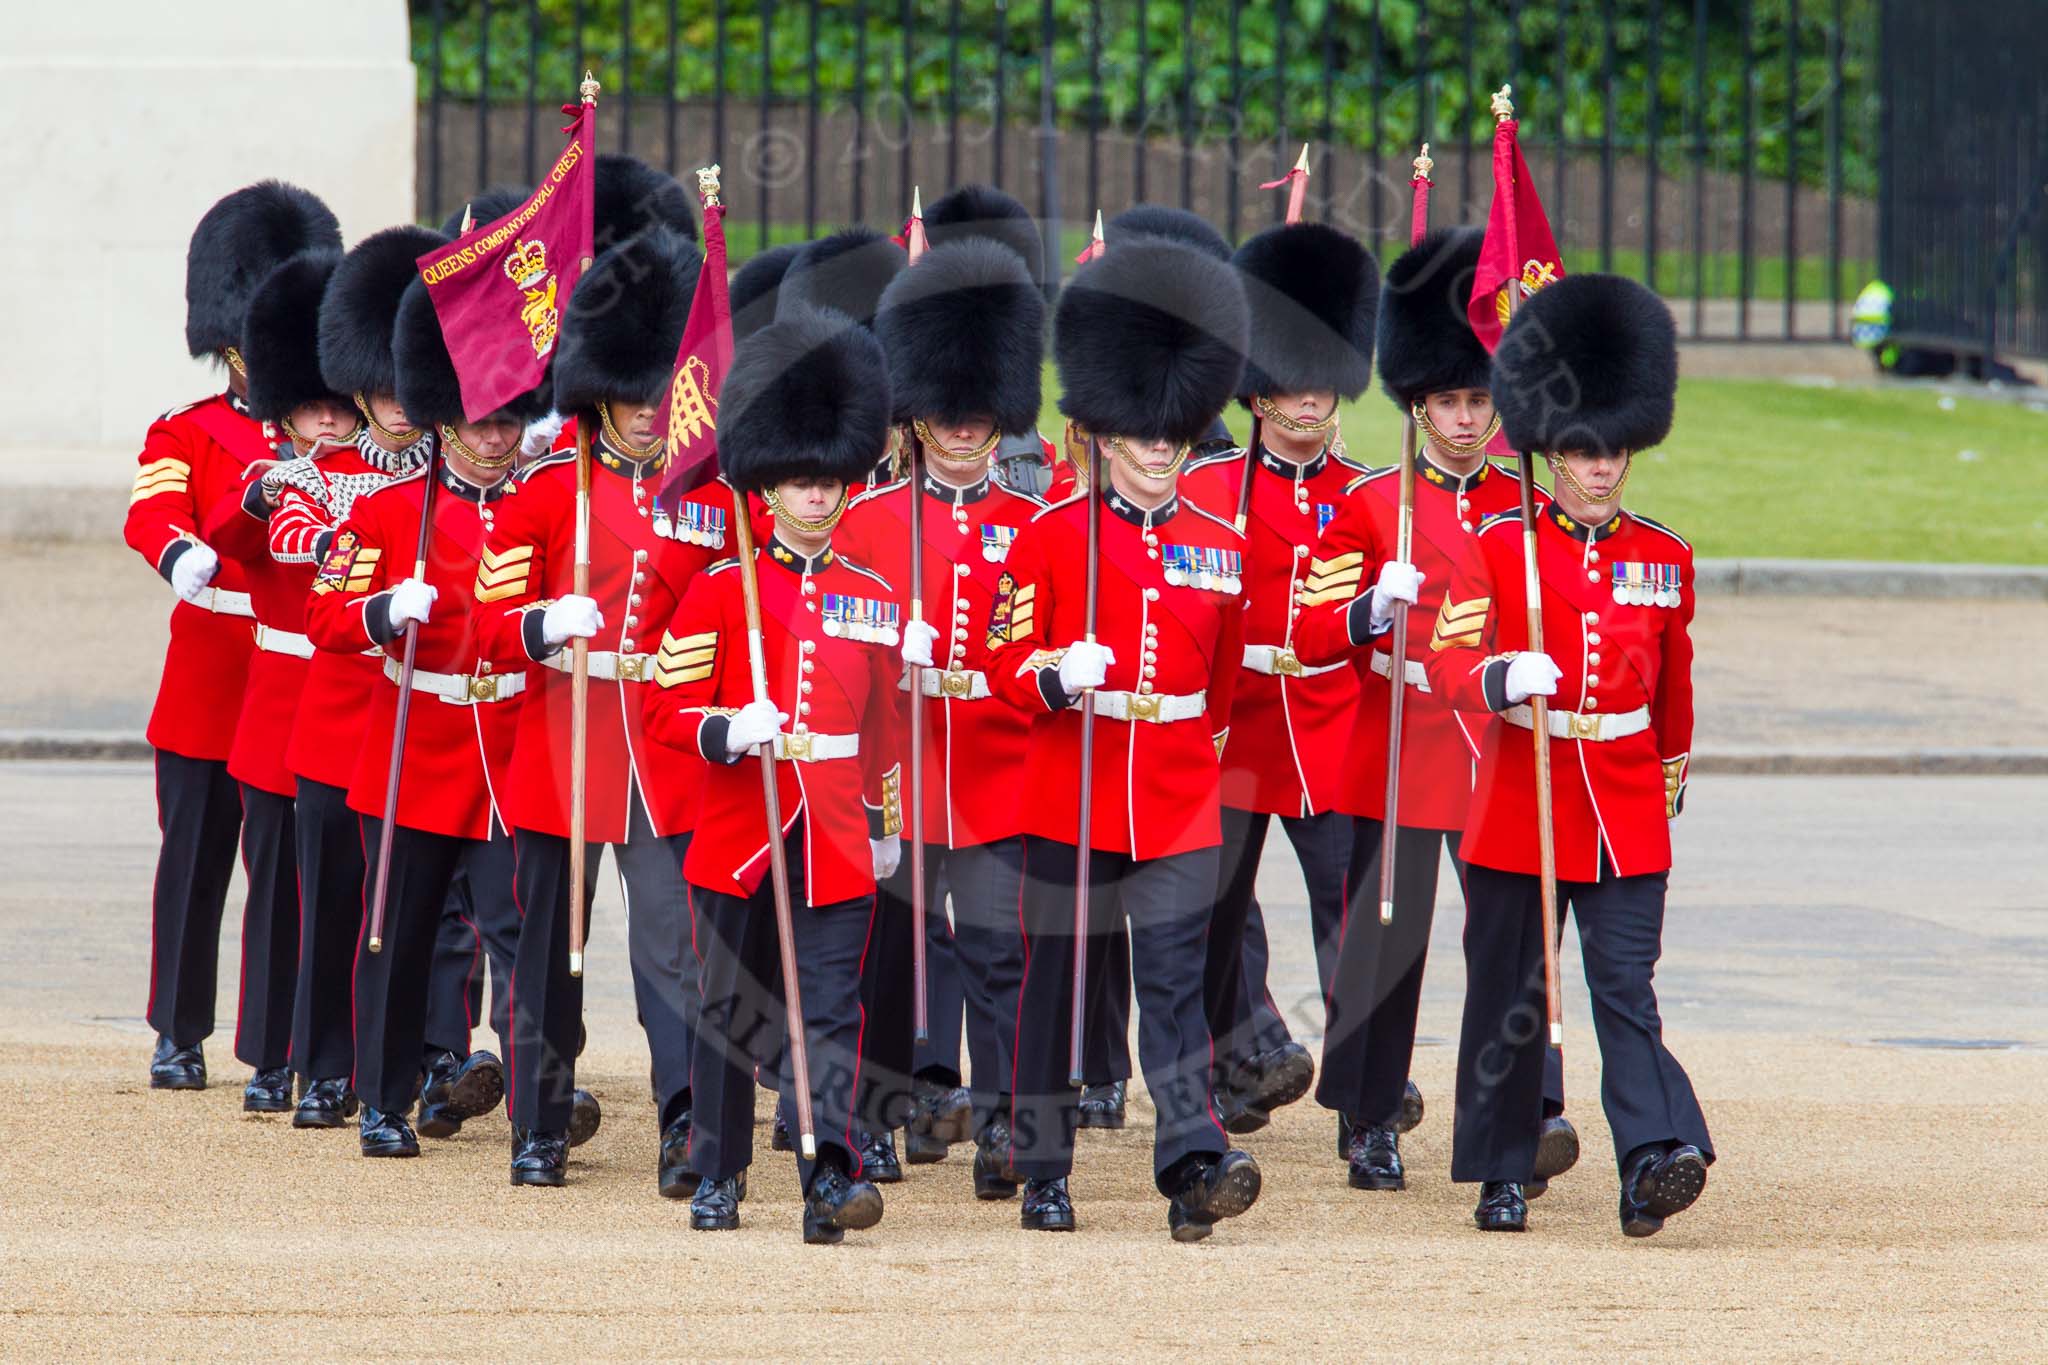 The Colonel's Review 2013: The 'Keepers of the Ground', guardsmen bearing marker flags for their respective regiments, turning towards Horse Guards Parade at the Guards Memorial..
Horse Guards Parade, Westminster,
London SW1,

United Kingdom,
on 08 June 2013 at 09:53, image #25